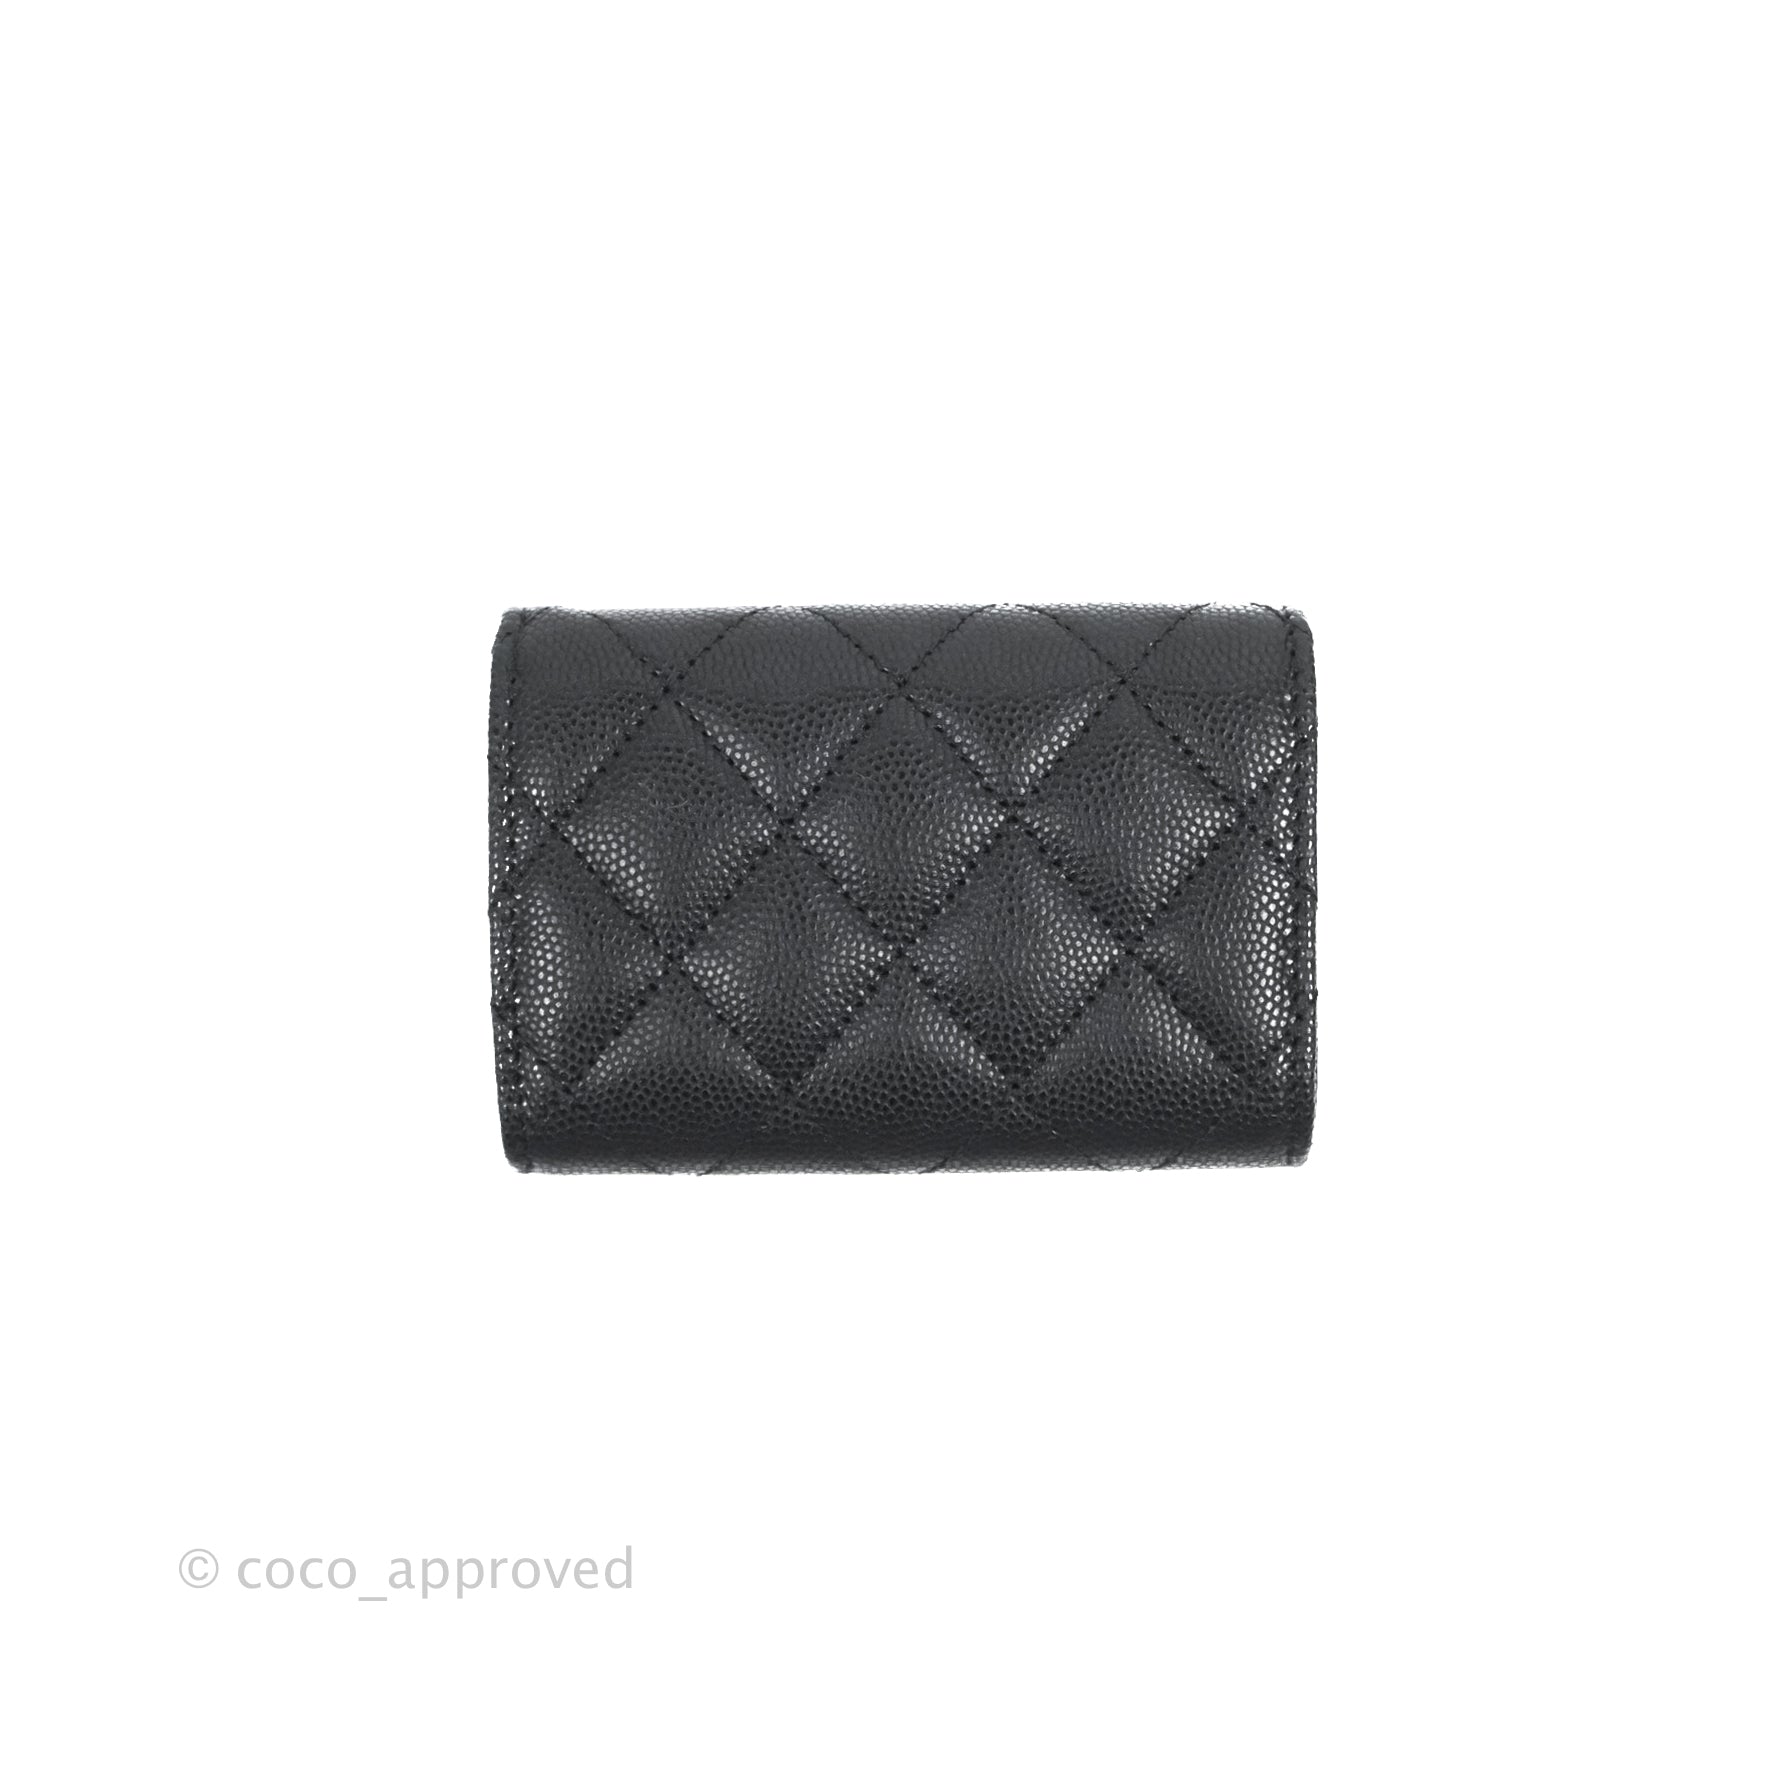 My Boy Chanel Flap Wallet Review